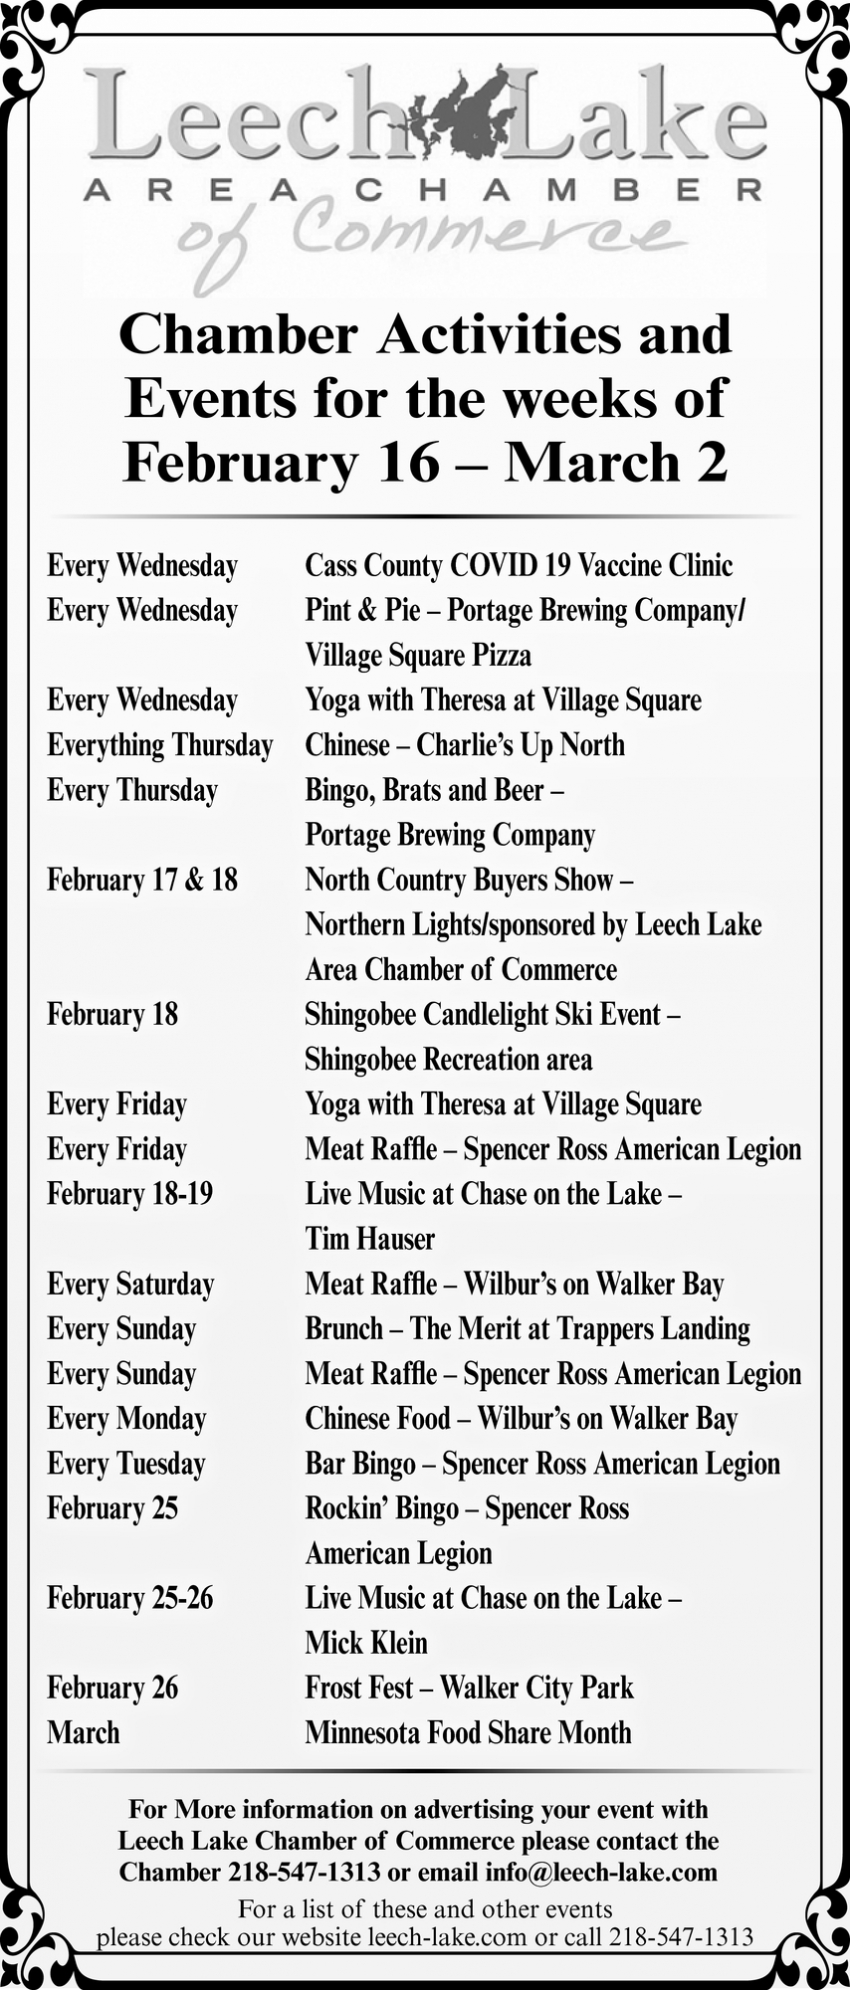 Chamber Activities And Events For The Weeks Of February 2 - February 16